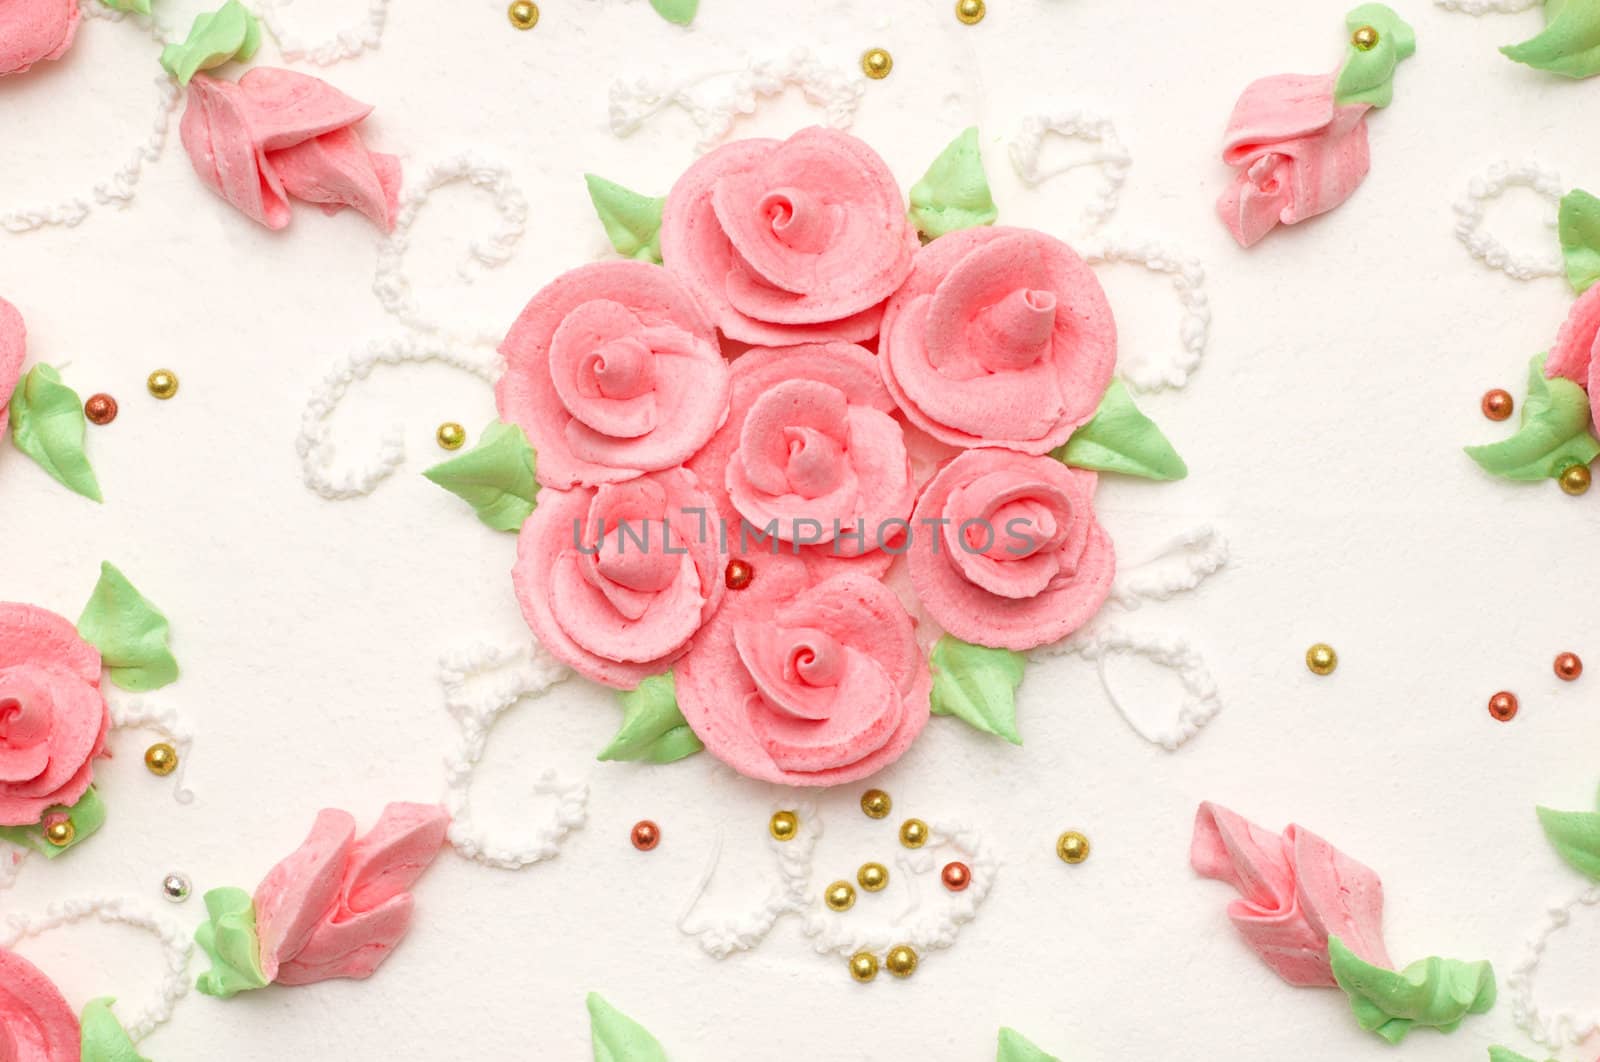 creamy cake decorated with roses. suitable as background.